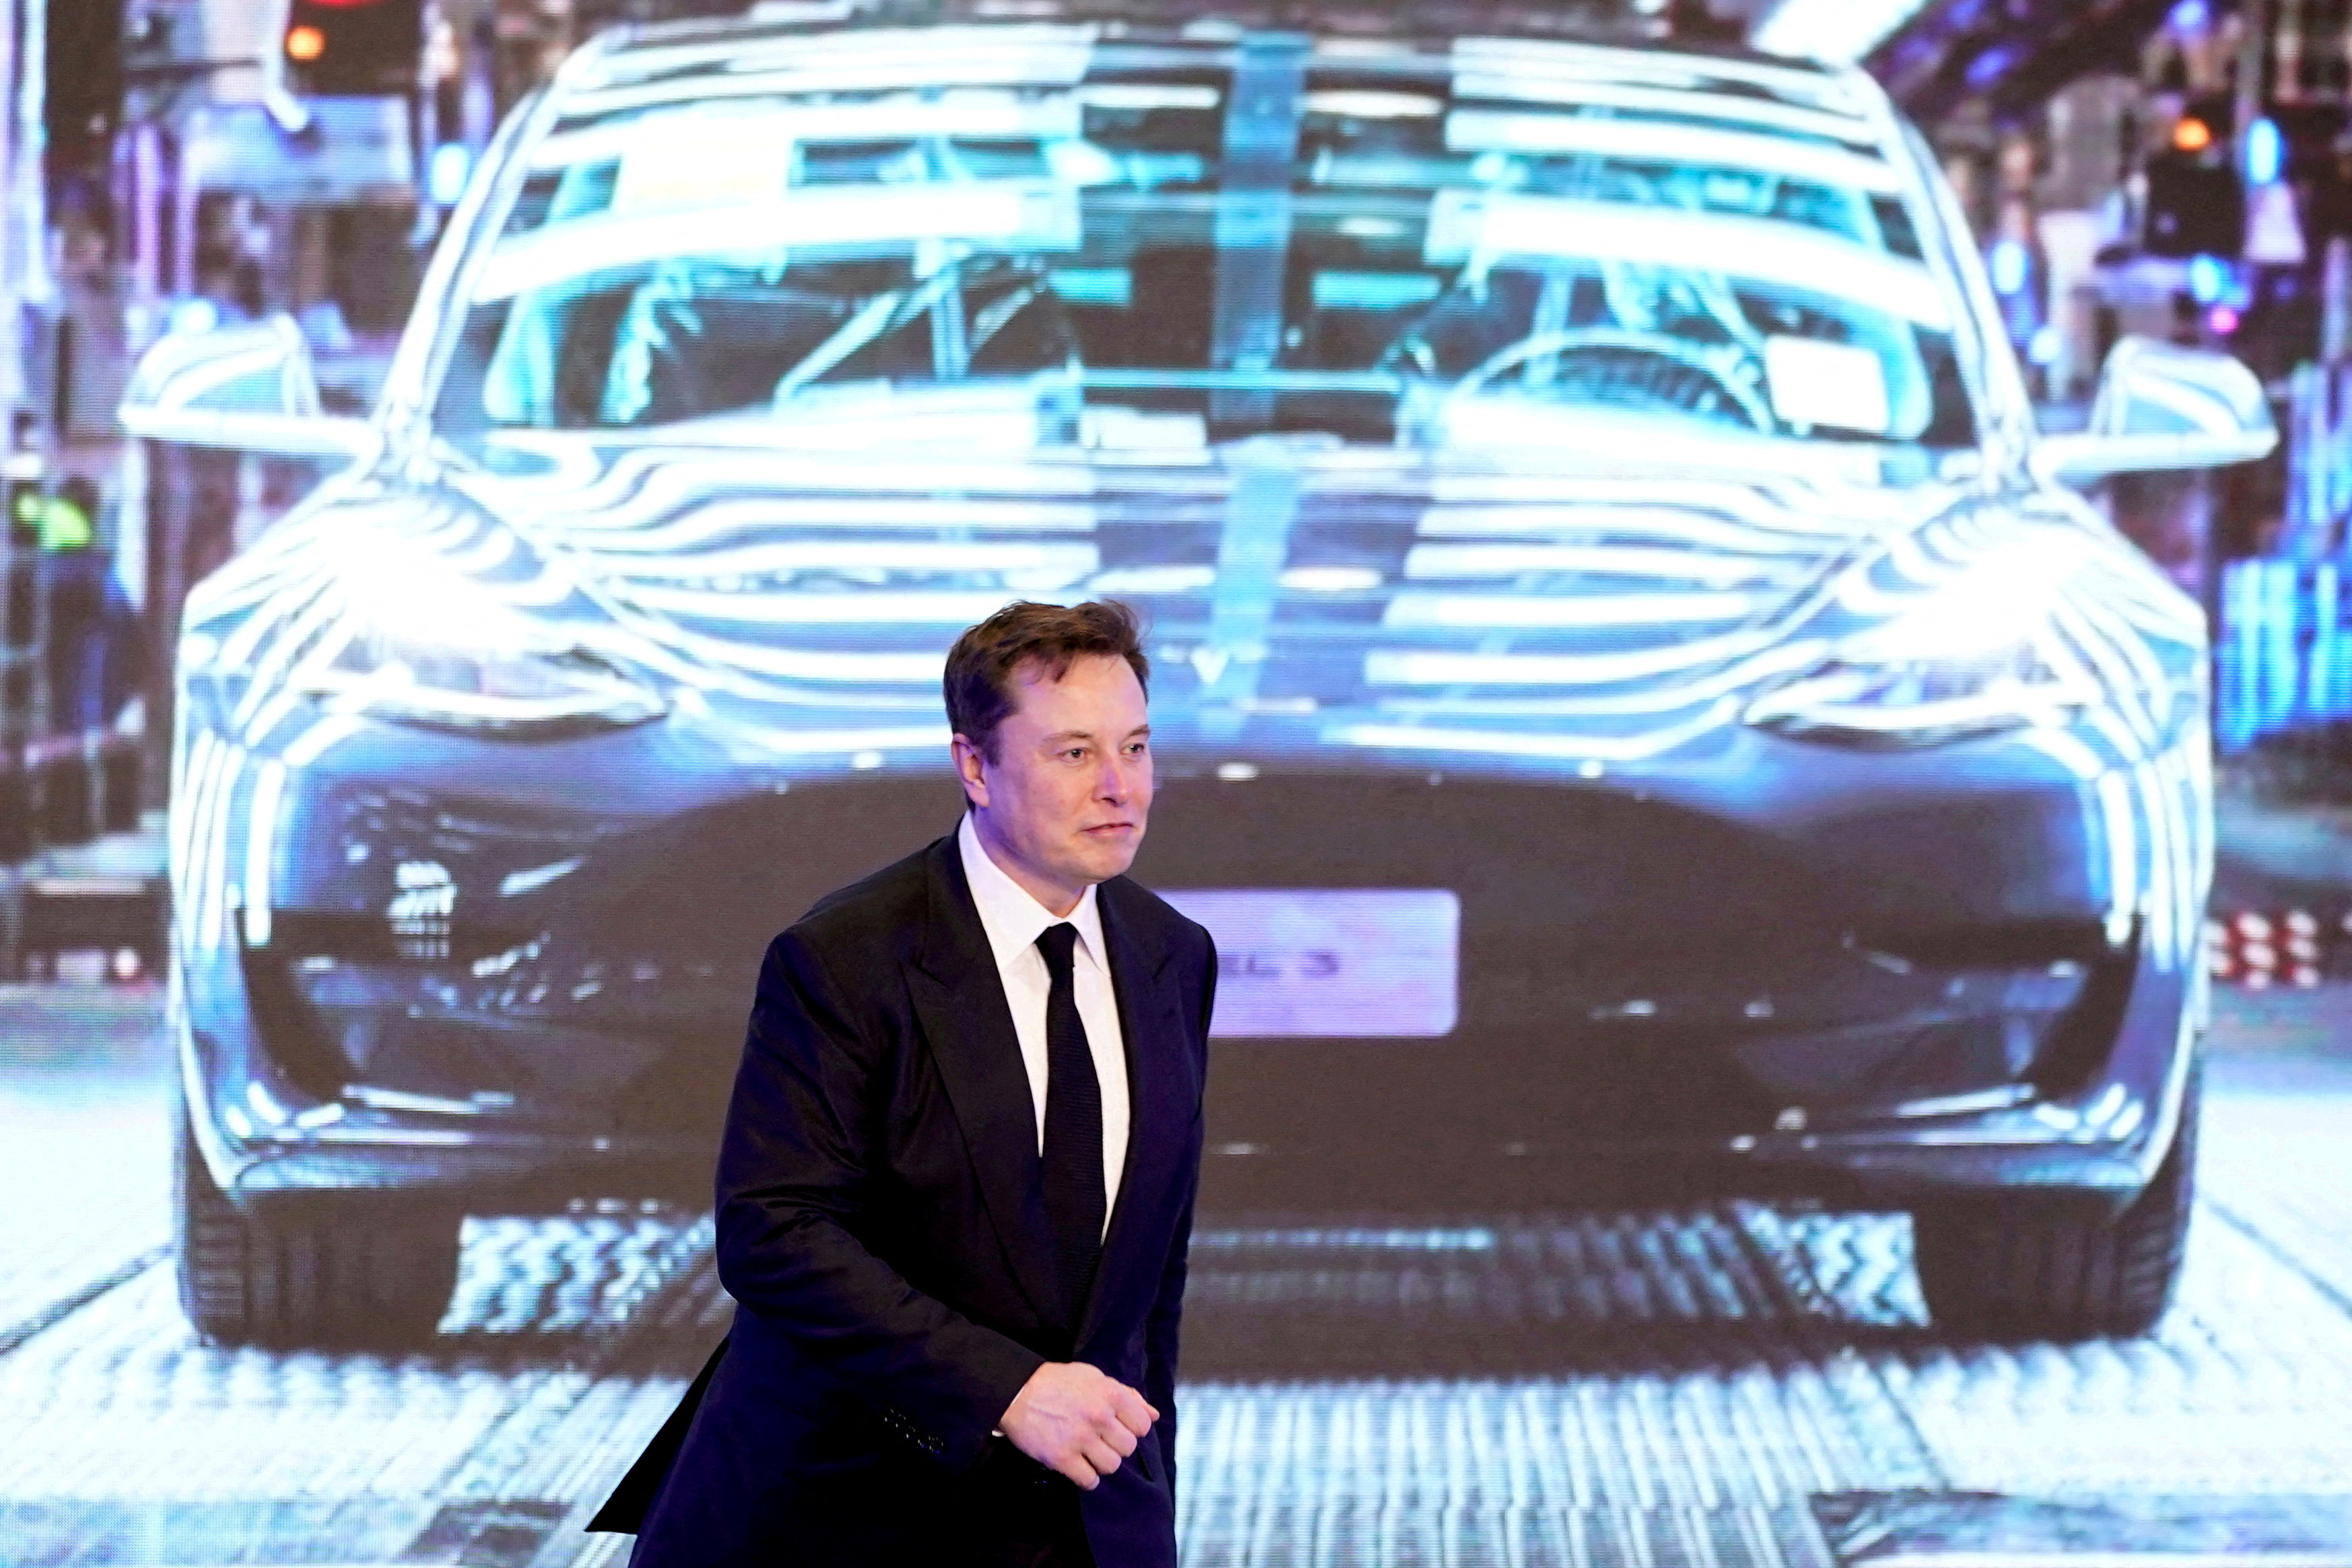 Elon Musk's fortune has been reduced by 200 billion dollars as a result of the collapse of his company's shares (REUTERS)